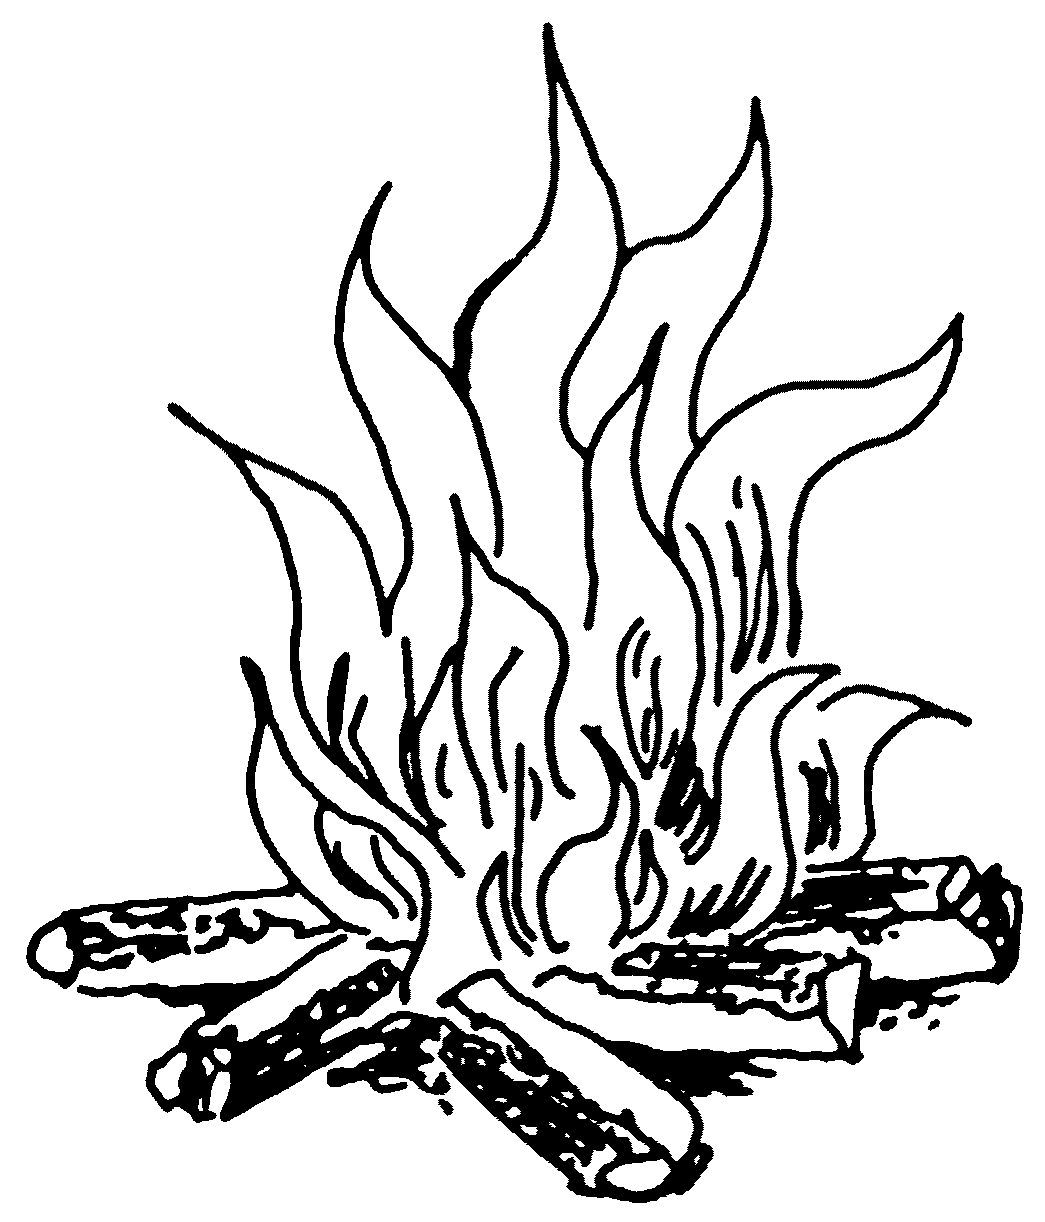 Fire Flames Image Coloring Pages